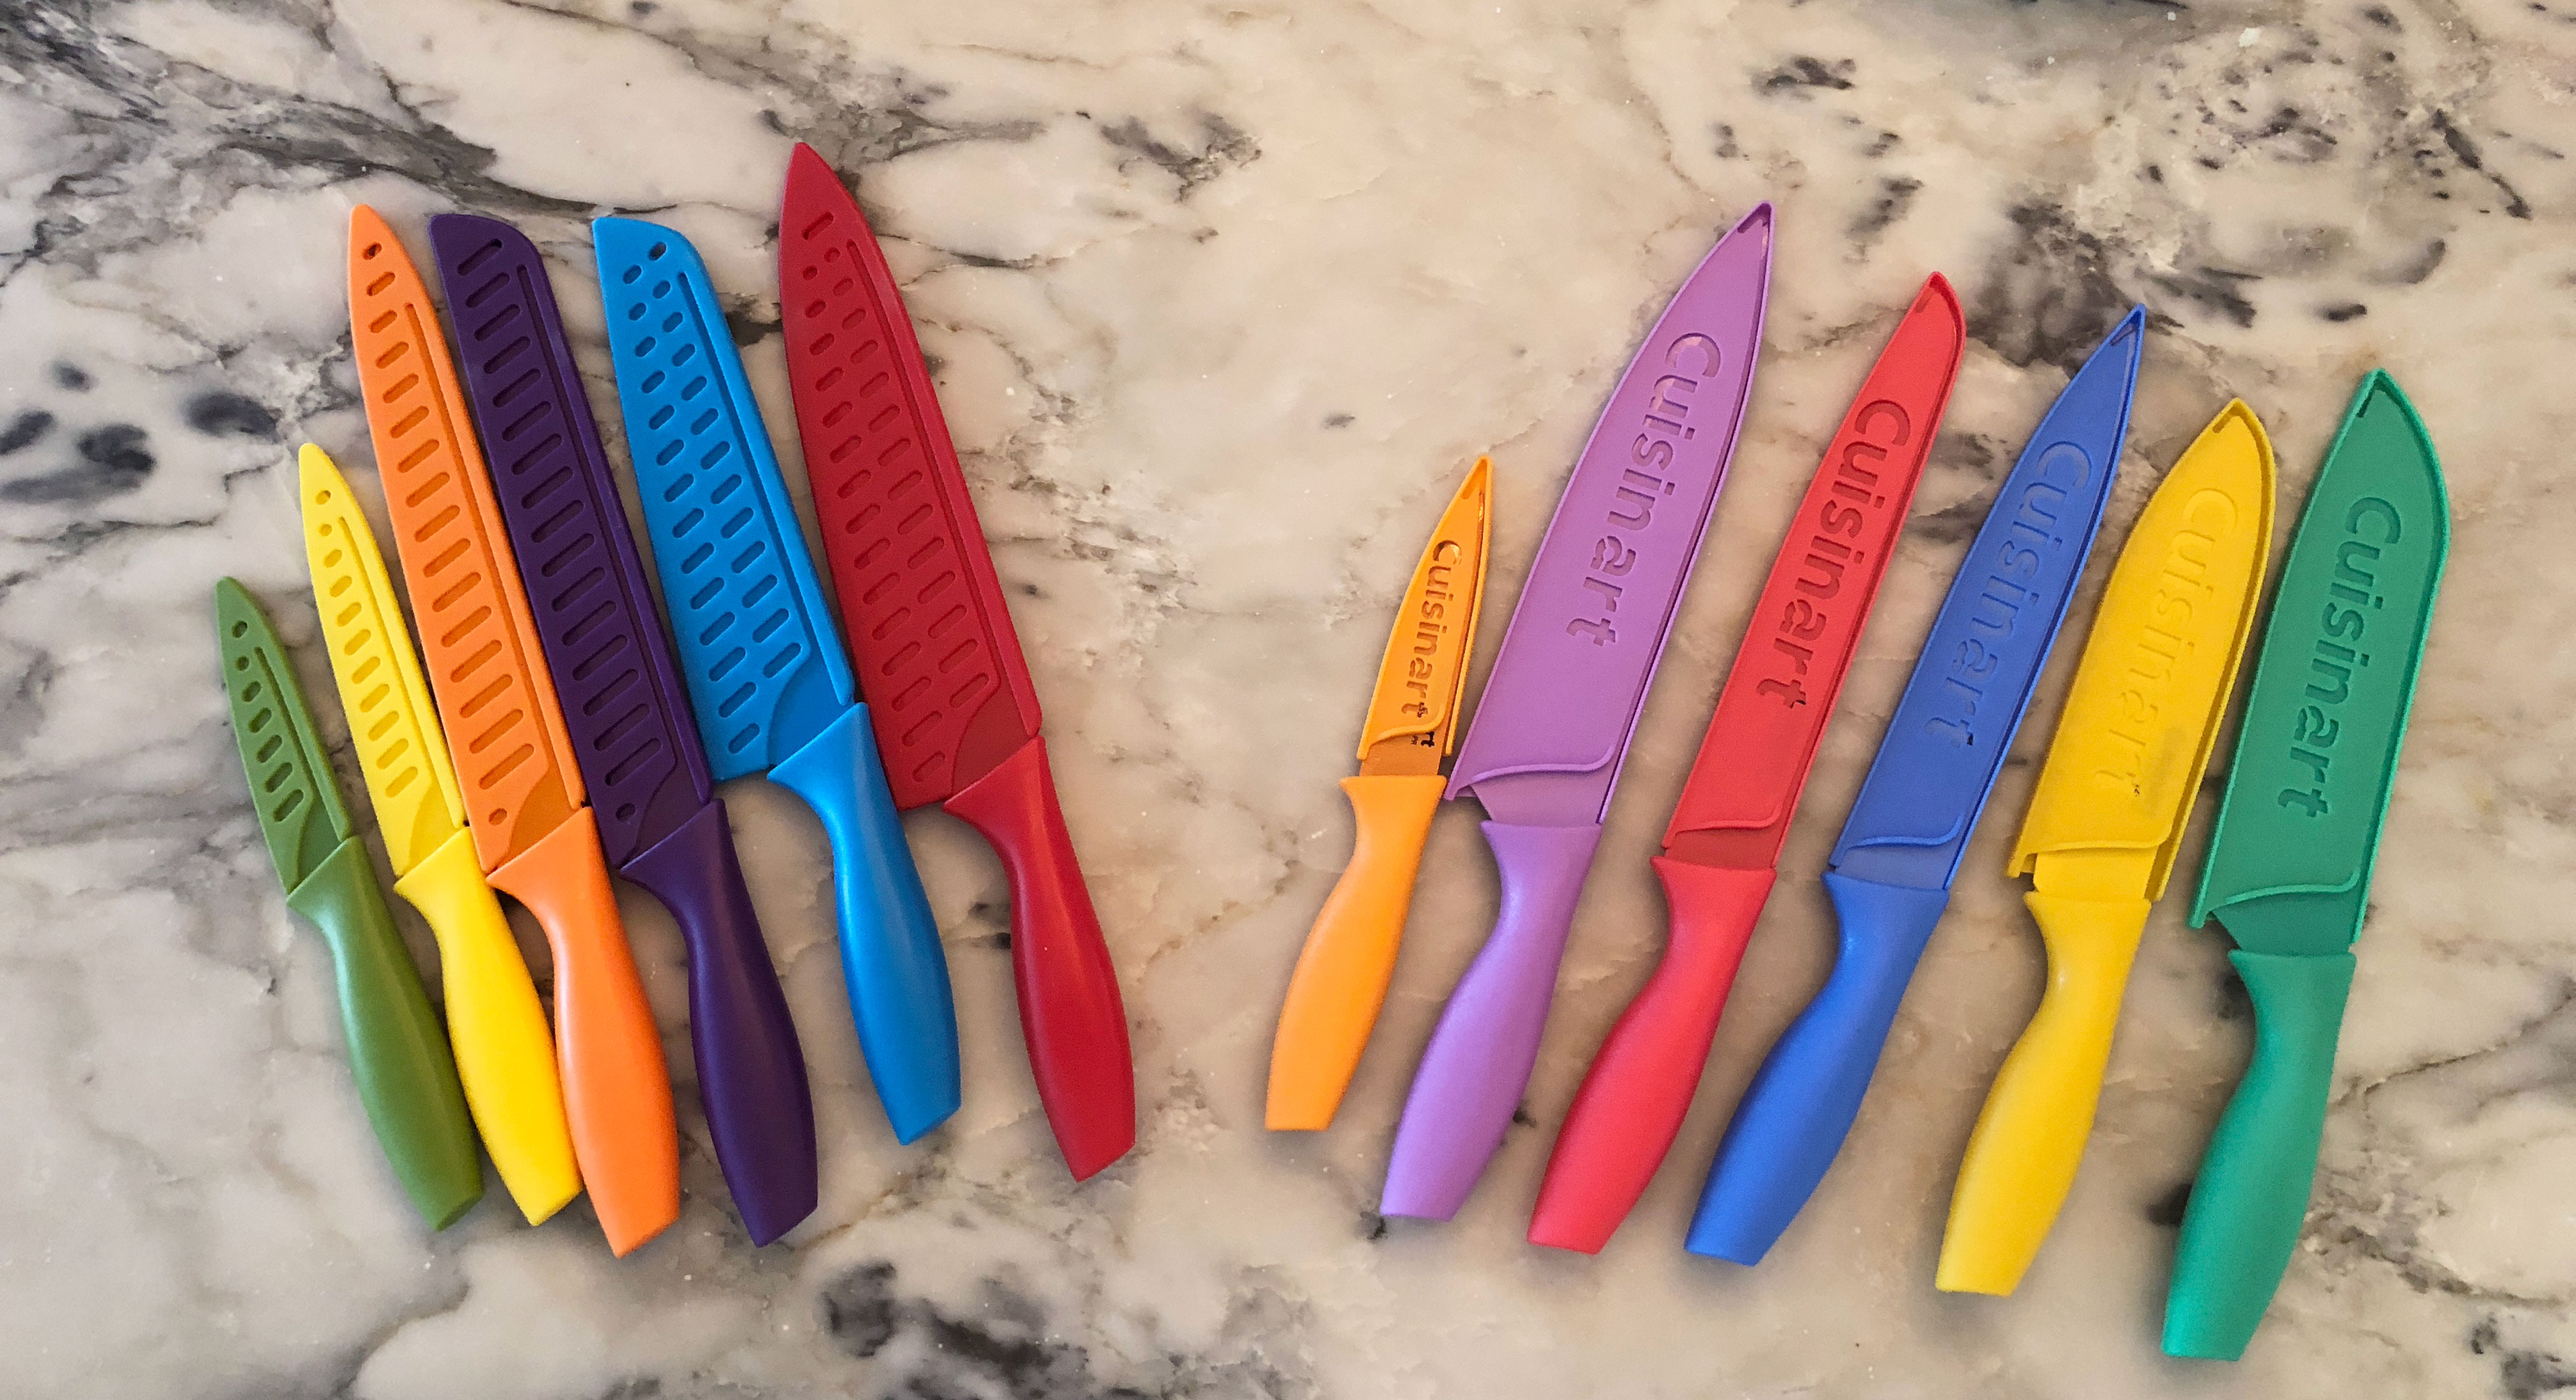 These ceramic knives were a part of our cost comparison of the Amazon brand cost versus other brands